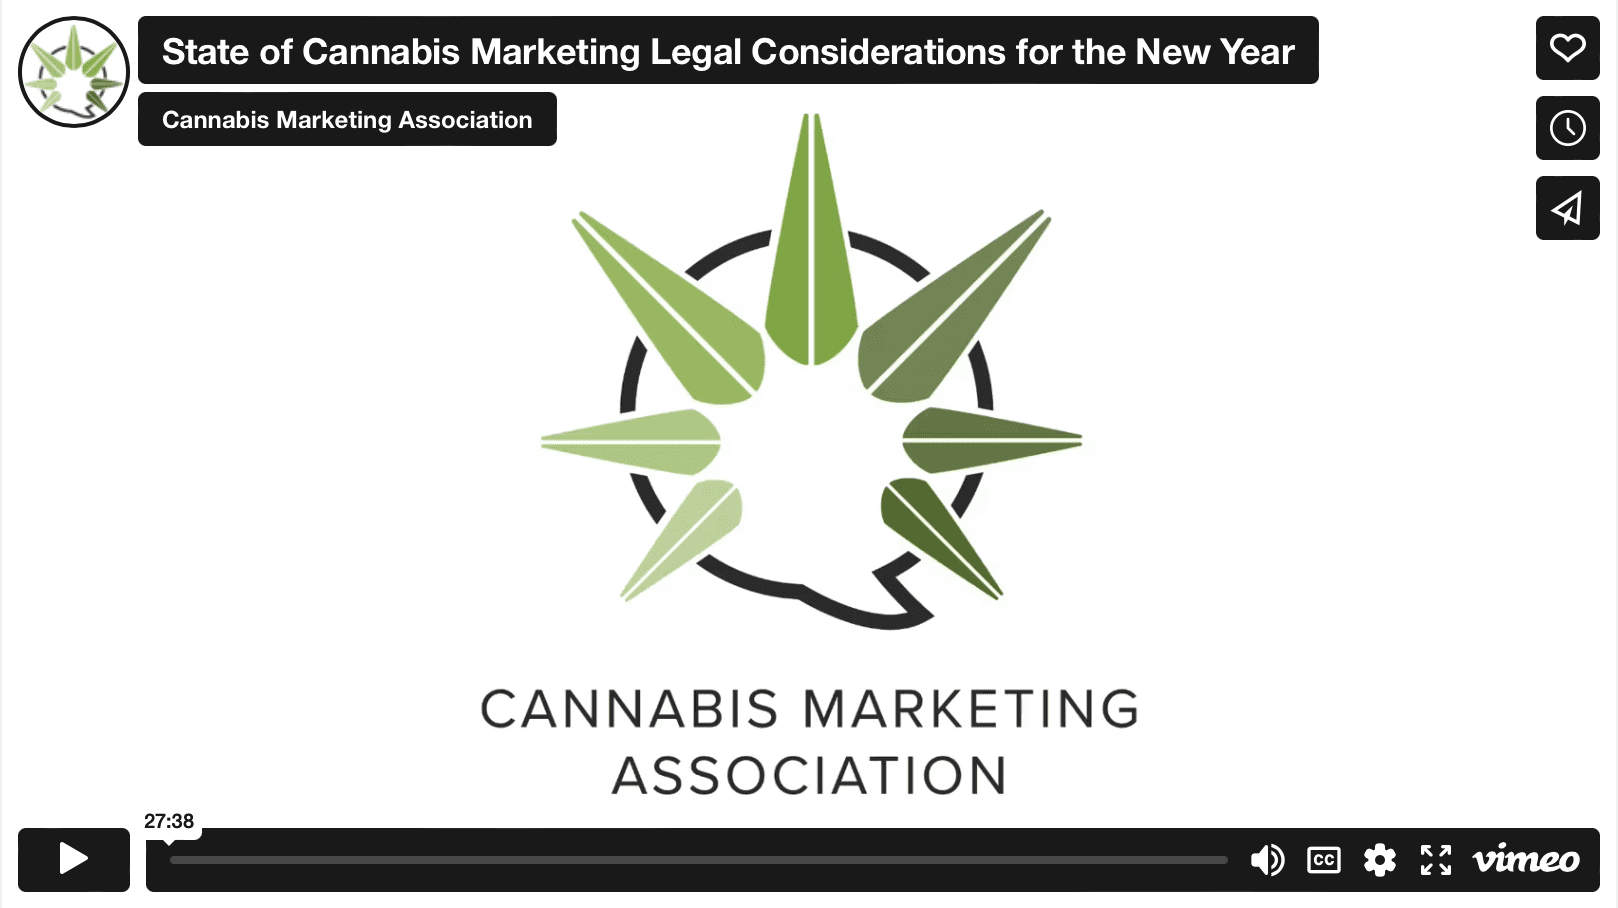 State of Cannabis Marketing: Legal Considerations for the New Year